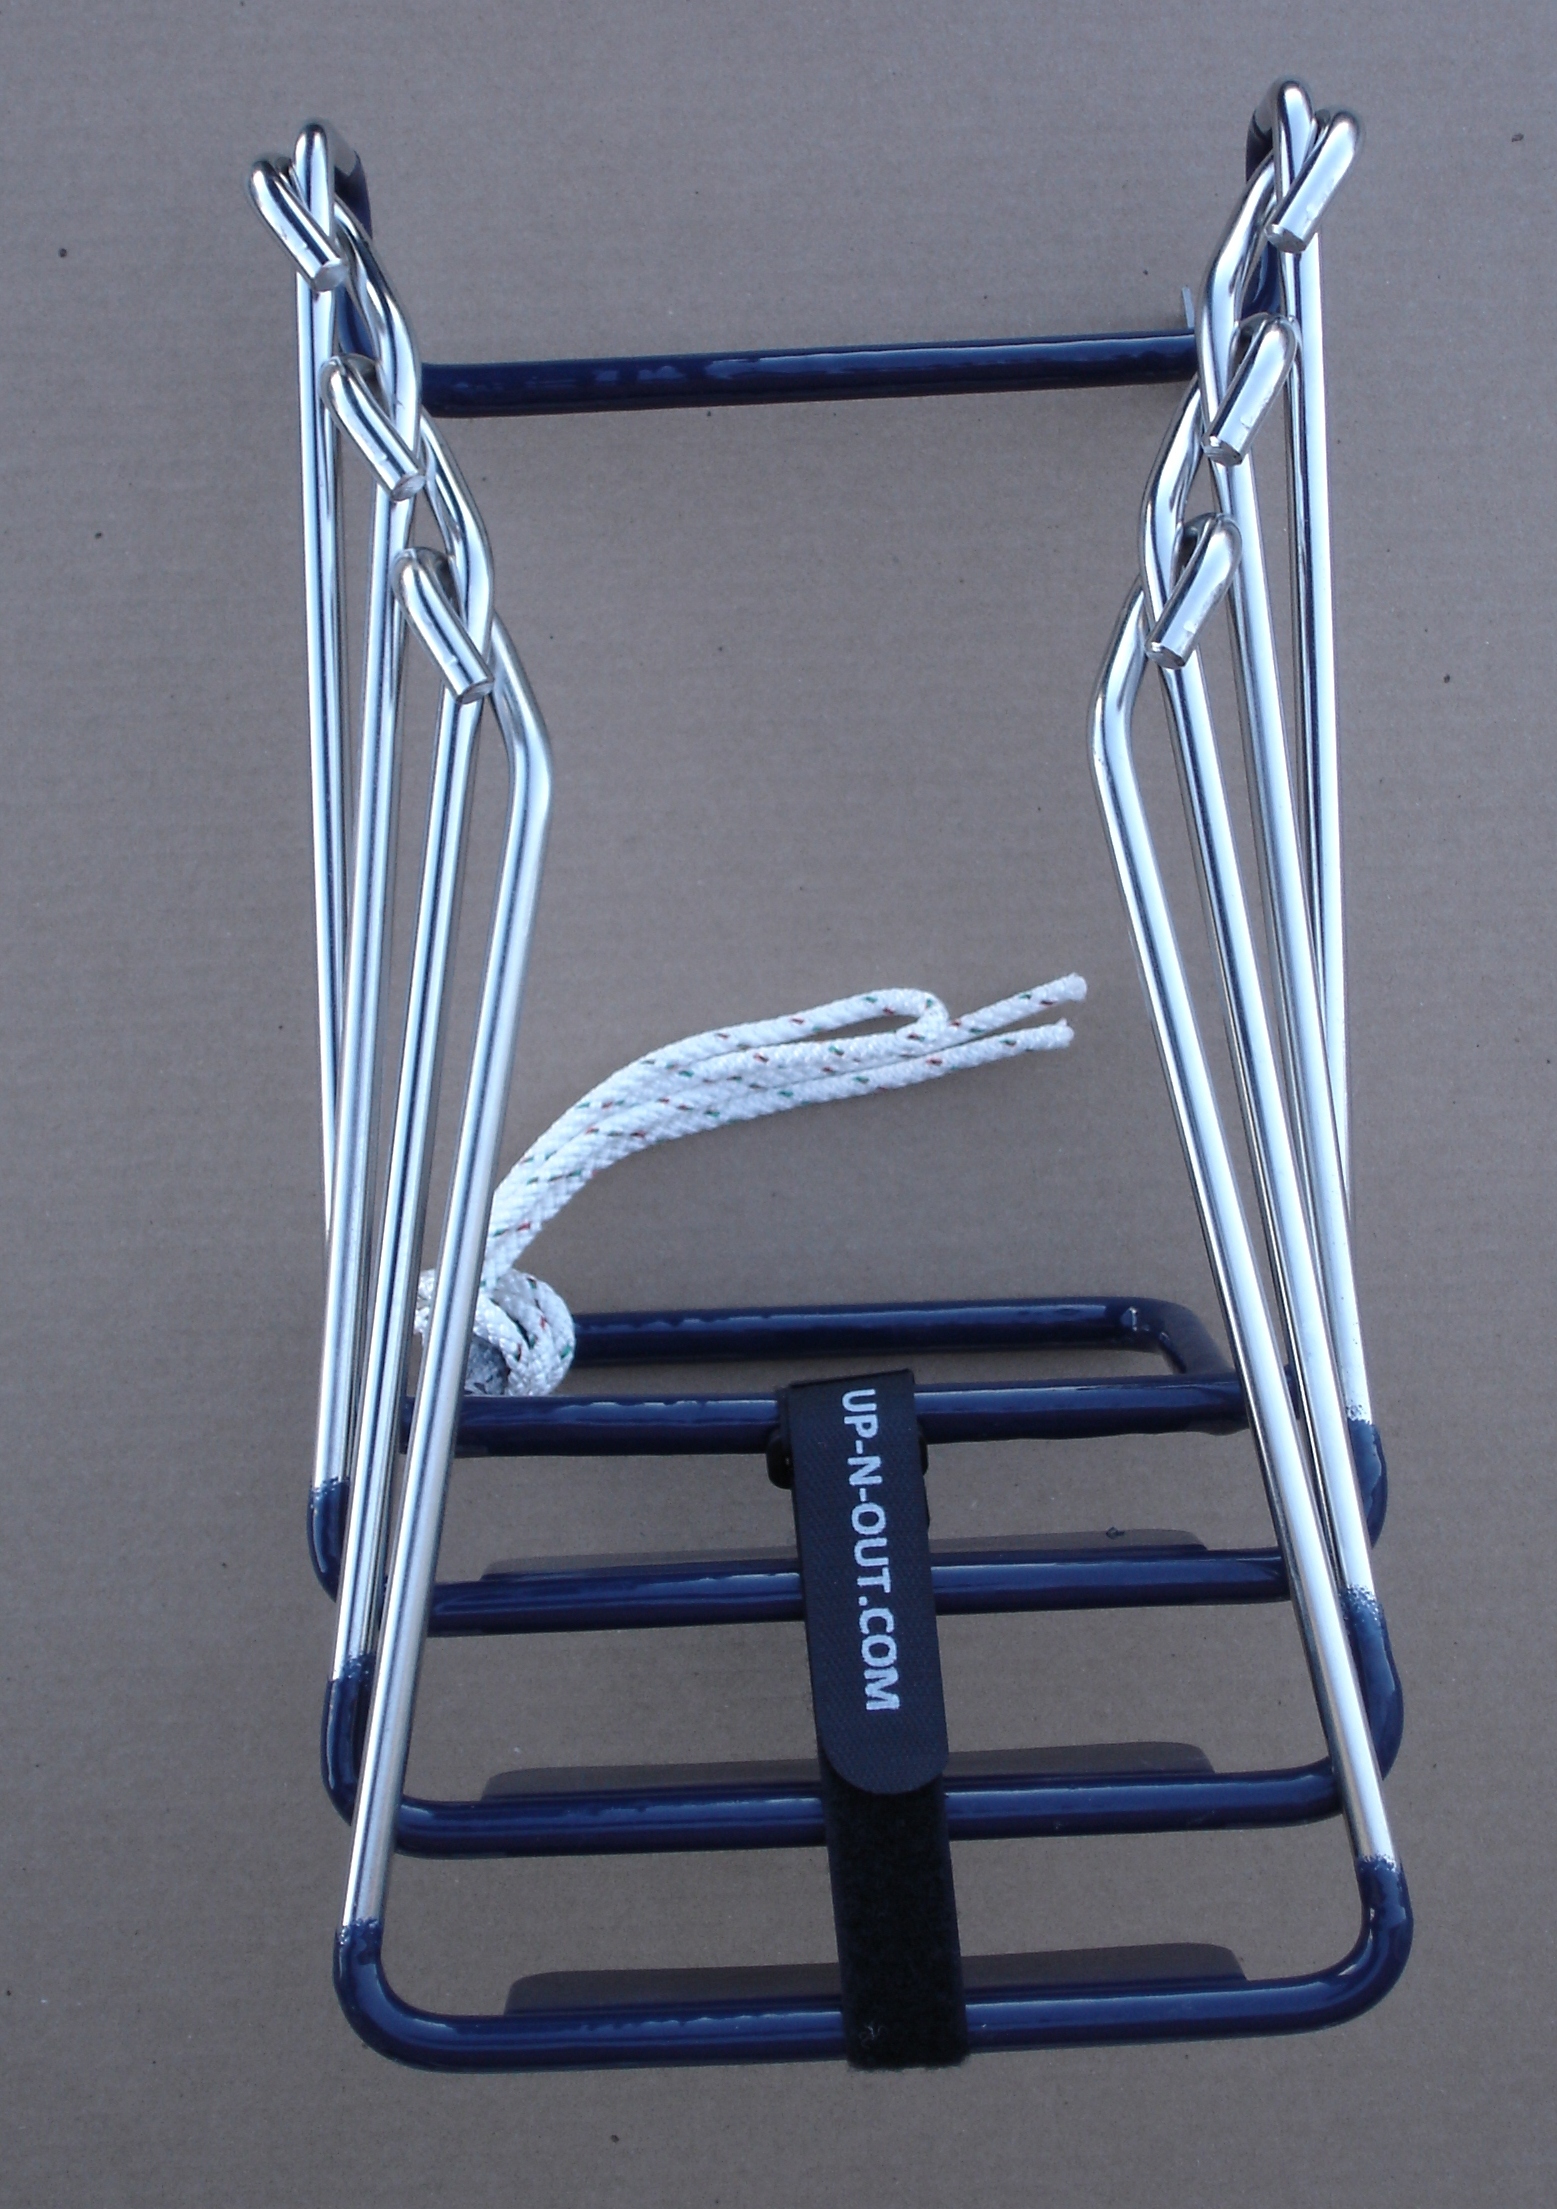 Wholesale Boarding Ladders For Small Boats